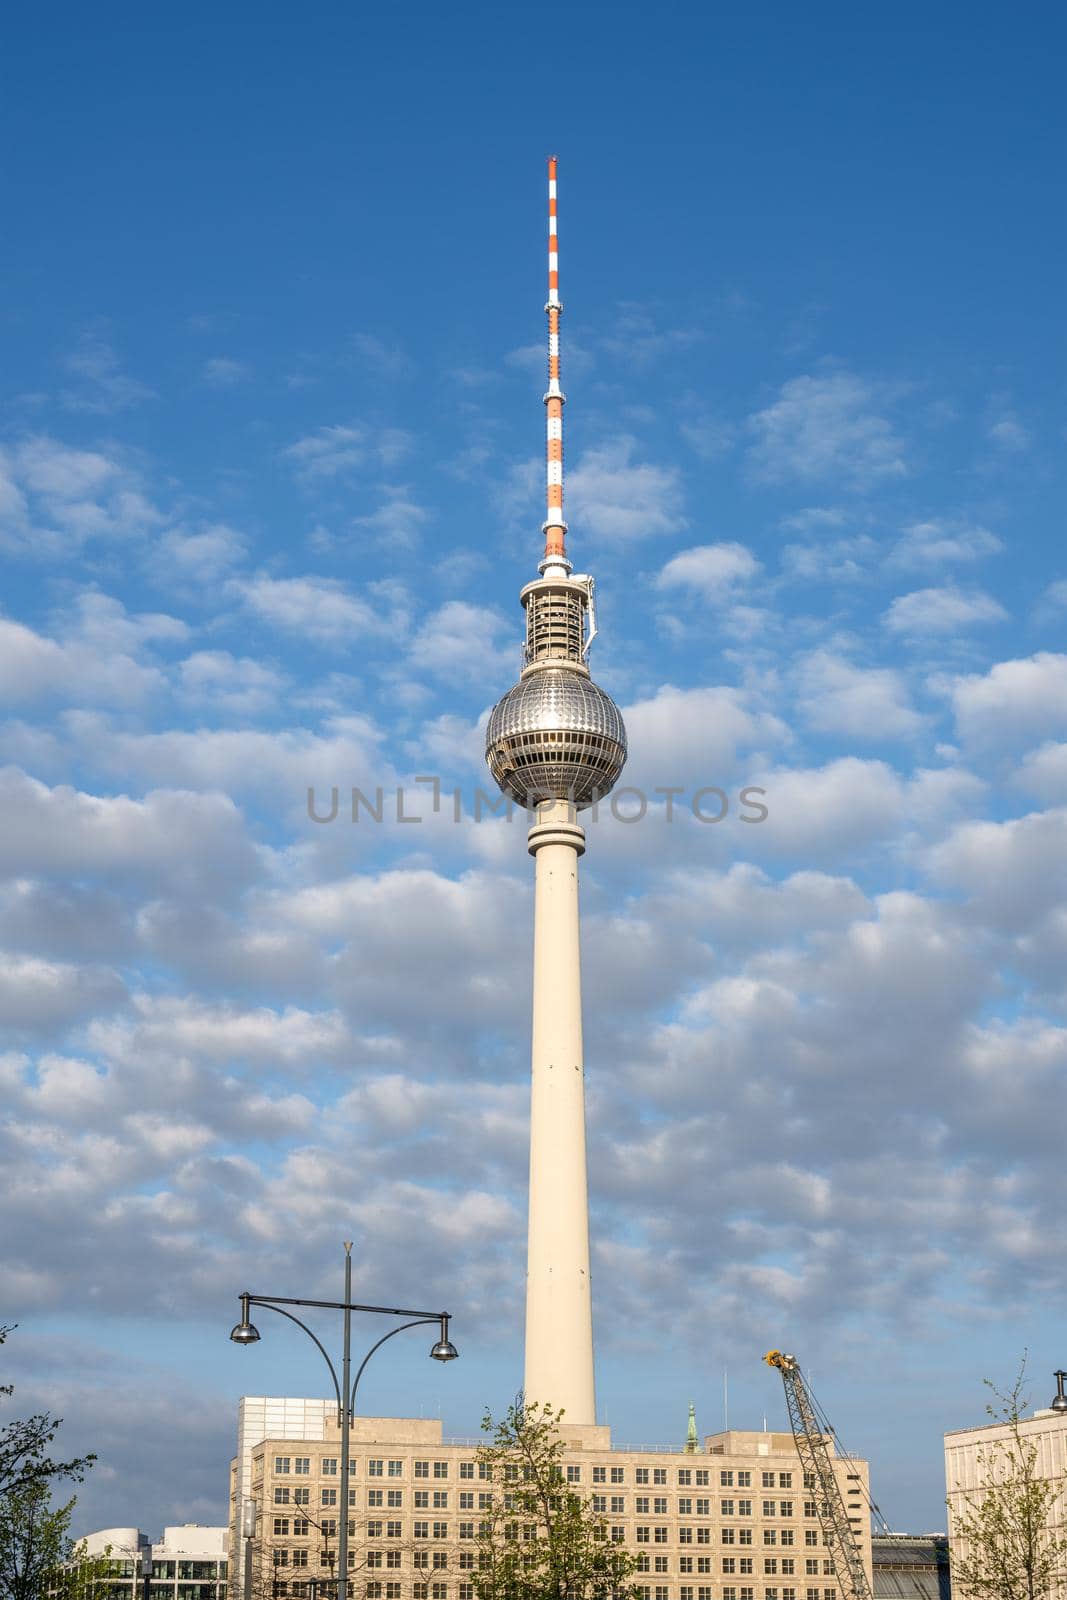 The famous TV Tower at the Alexanderplatz in Berlin